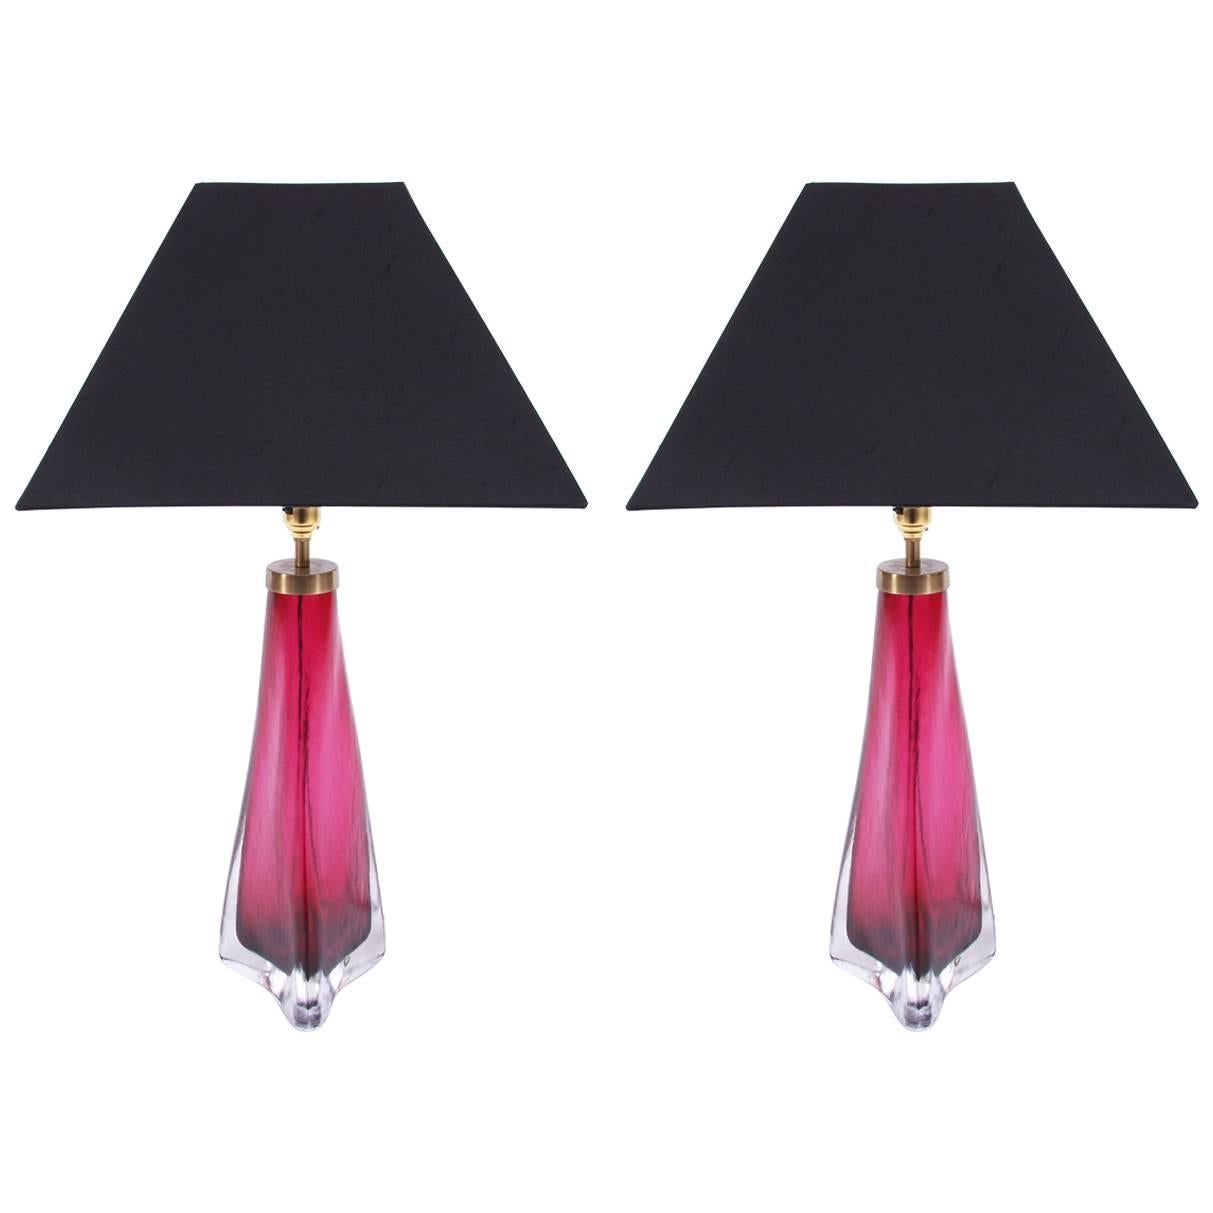 Pair of Cranberry Orrefors Lamps